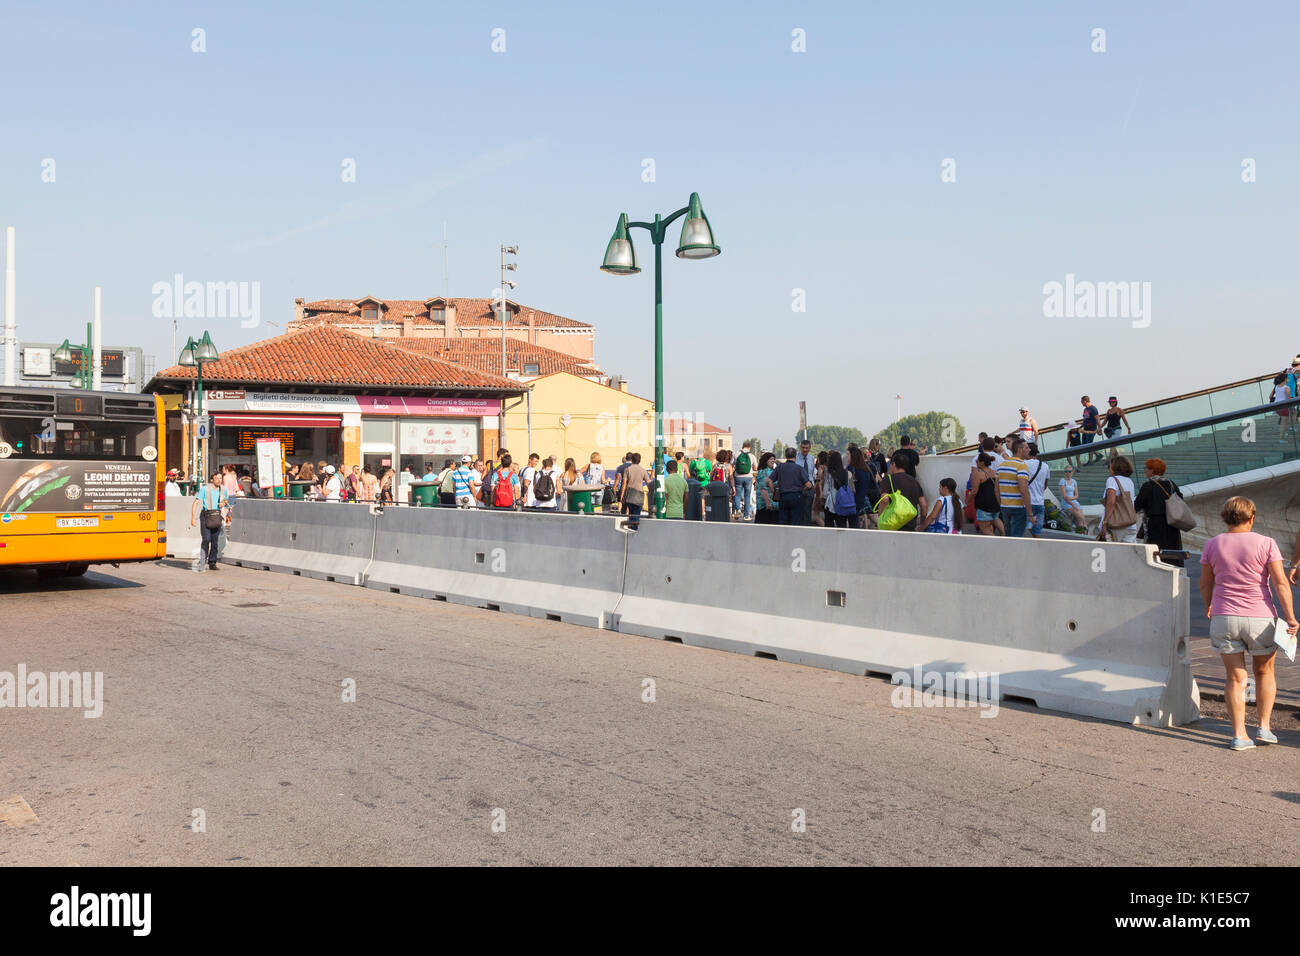 Venice, Italy. 26th Aug, 2017. Anti-terror preparations for the 2017 Venice Film Festival due to start on the 30 August. Overnight the first of the concrete barriers have been installed in the Piazzale Roma to protect pedestrians and the tram lines from vehicular terror attacks. close up on the section of barrier already in place in front of the public transport ticket office with tourist behind it. Credit: Mary Clarke/Alamy Live News Stock Photo